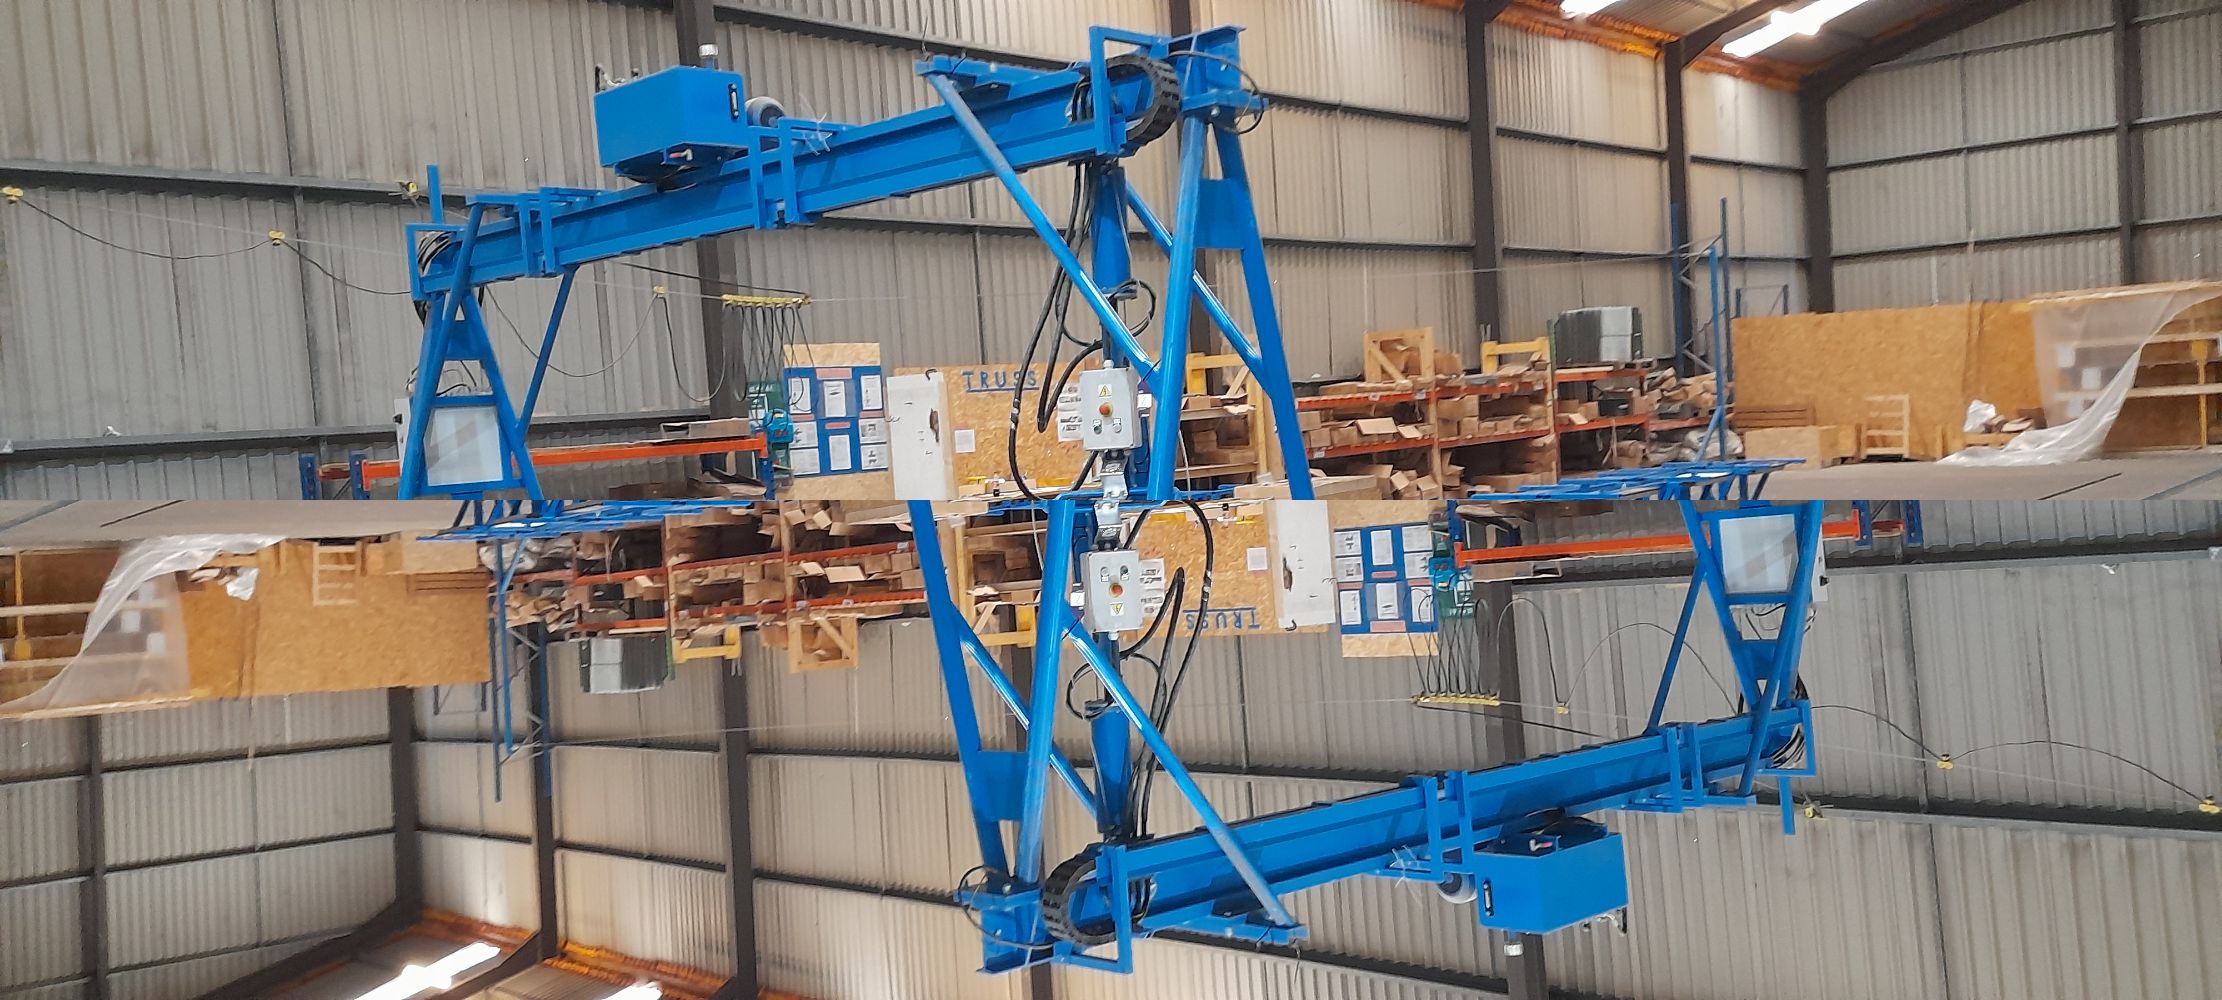 Range of Truss Manufacturing and Standard Woodworking Machinery